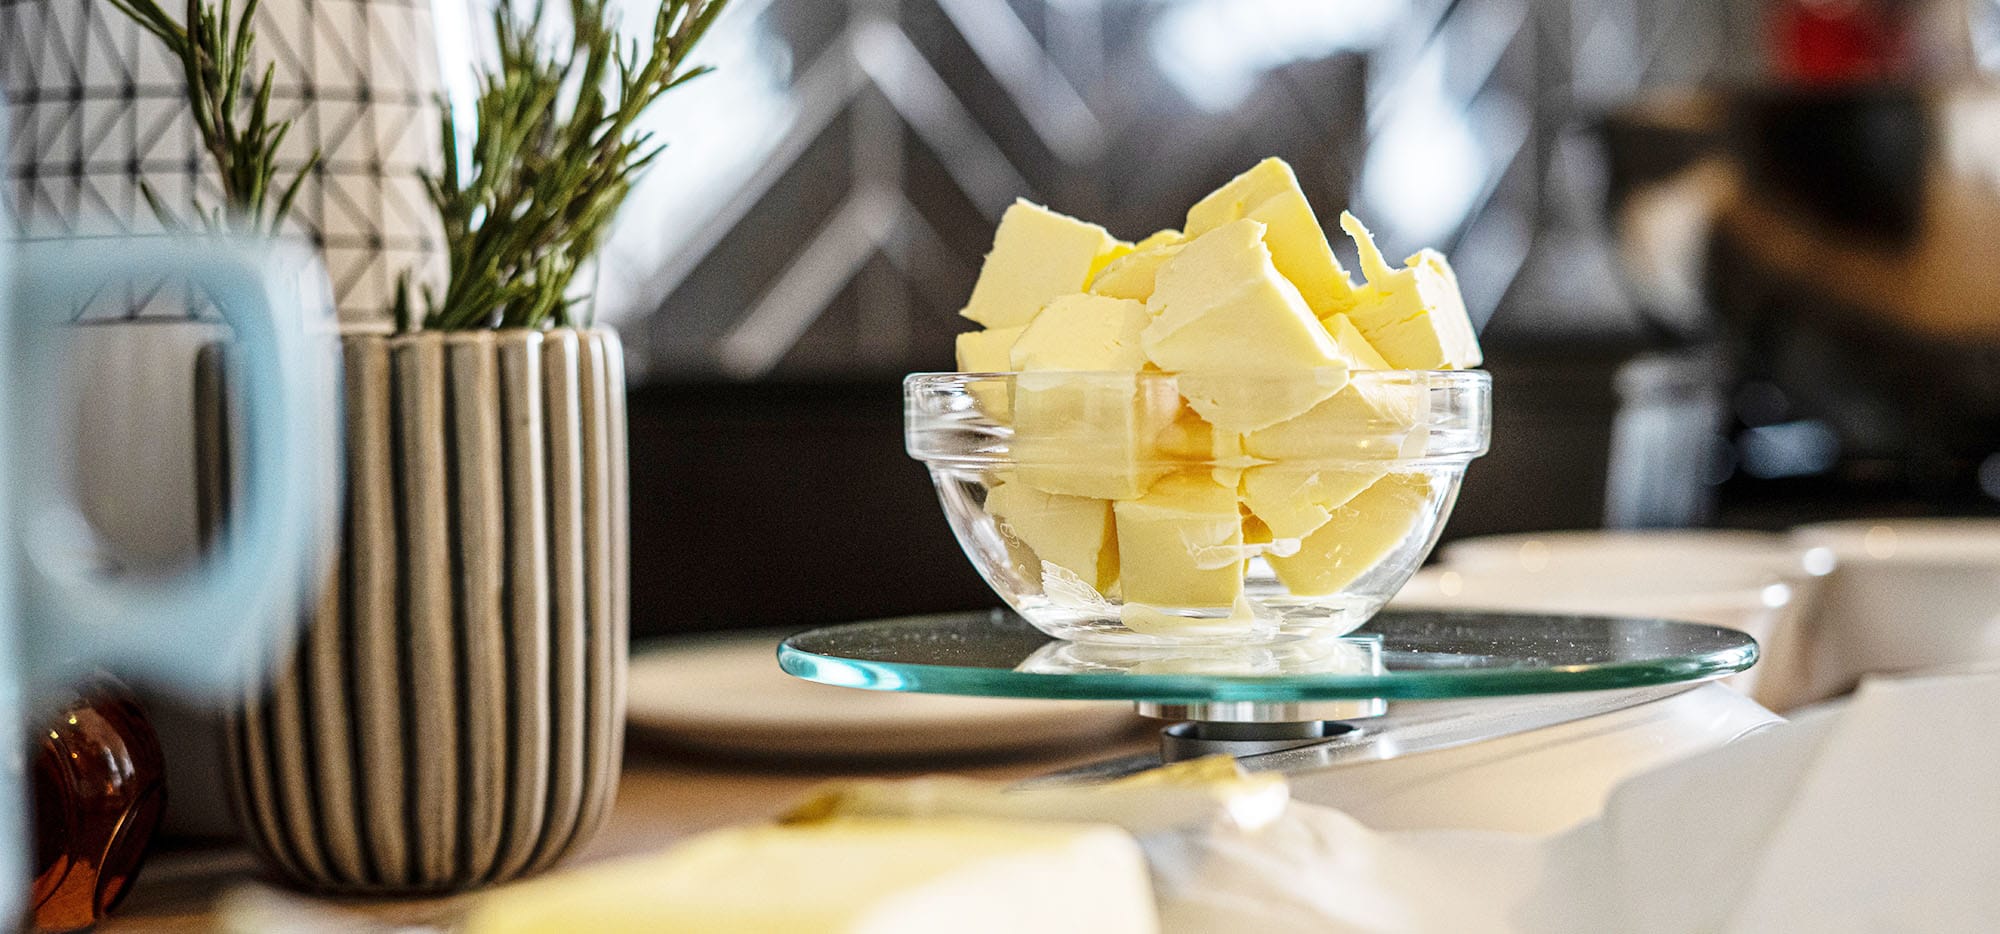 Bowl of chunks of butter sitting on a glass burner